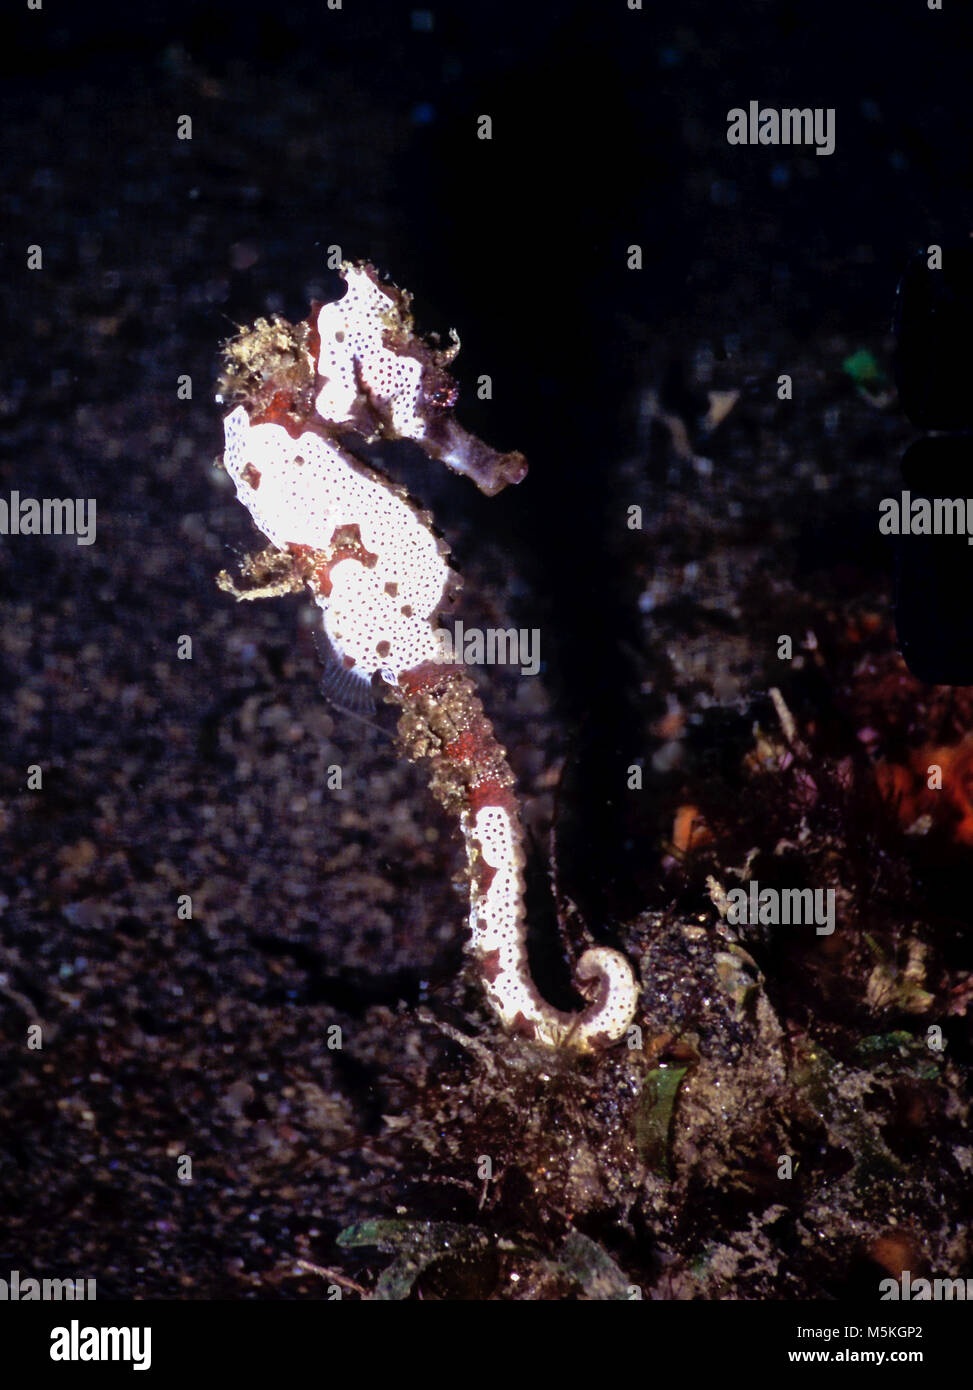 This is a picture of a thorny seahorse (Hippocampus histrix: 10 cms.). The IUCN Red List indicates that it is vulnerable. It is found in the Indo-West Pacific, usually near sponges and soft corals. In common with other seahorse species, it is threatened because of over-fishing (it becomes trawl bycatch), pollution and coastal development. For protection, the bodies of all seahorses are covered with bony plates. In this instance, many of these plates are overlaid with an encrustation of white bryozoans, which helps to camouflage the animal. Photographed in northern Sulawesi waters, Indonesia. Stock Photo